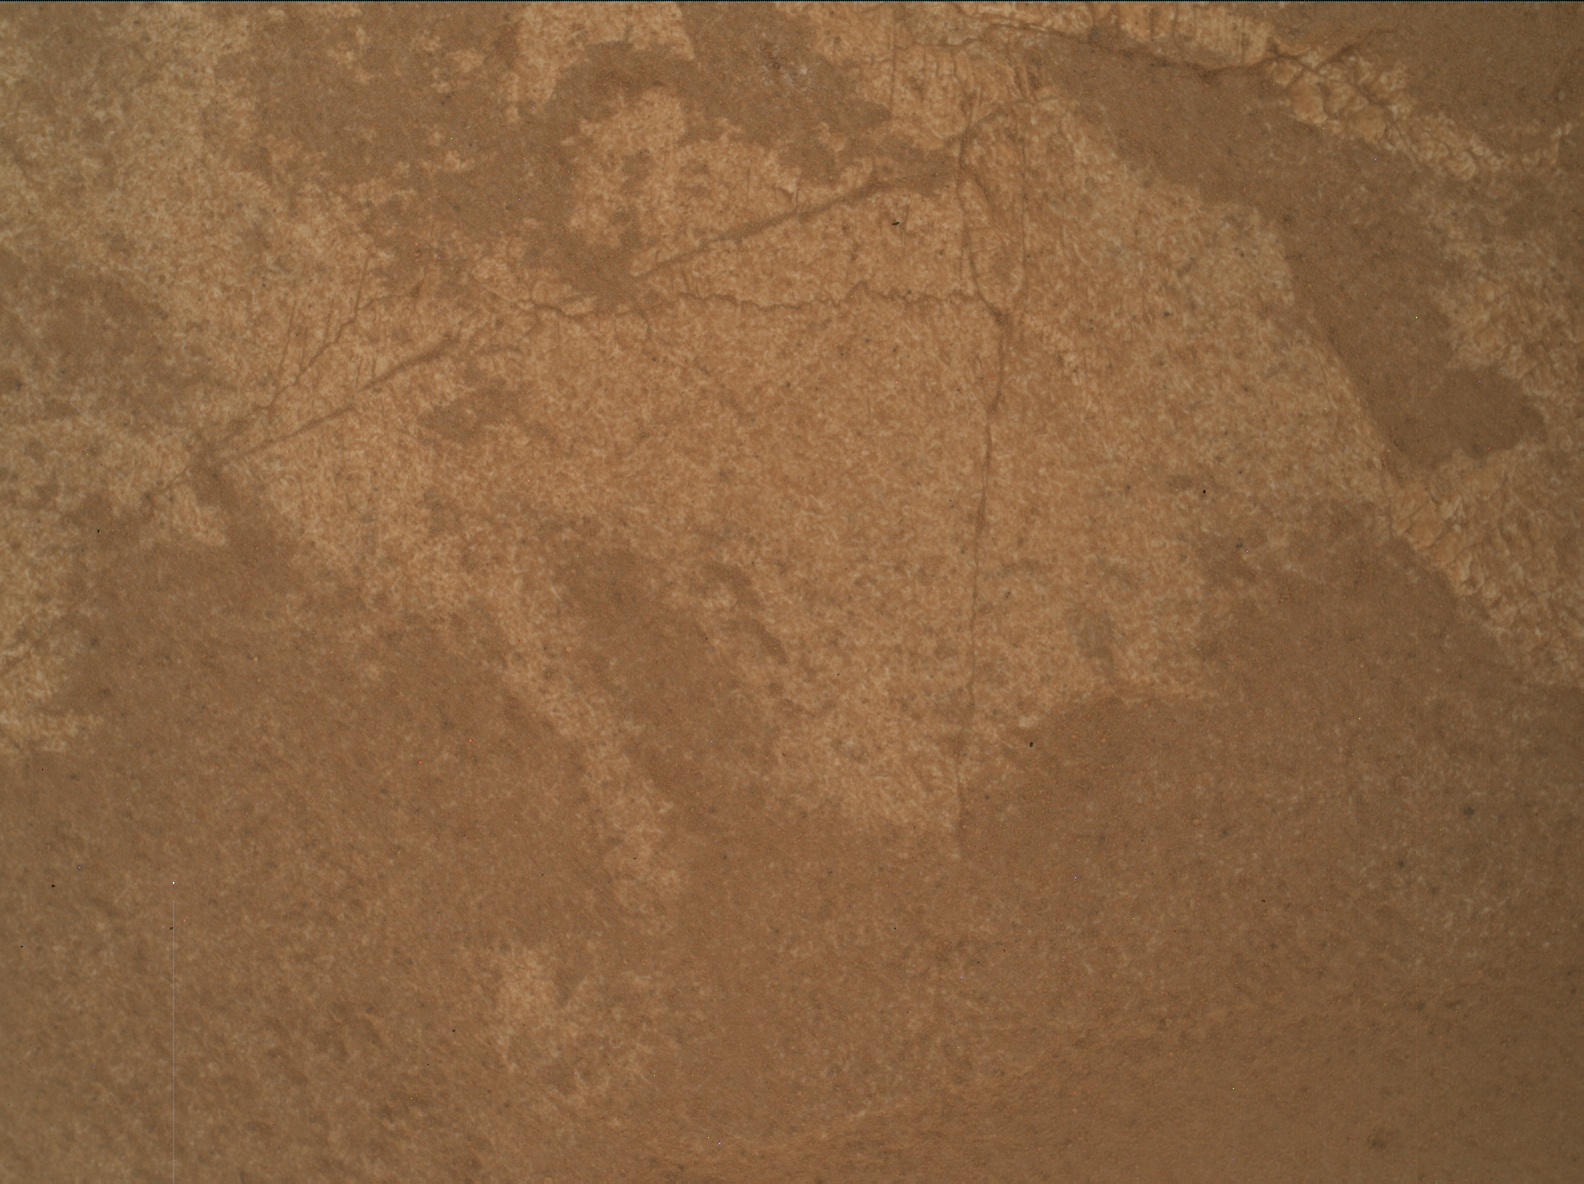 Nasa's Mars rover Curiosity acquired this image using its Mars Hand Lens Imager (MAHLI) on Sol 3280